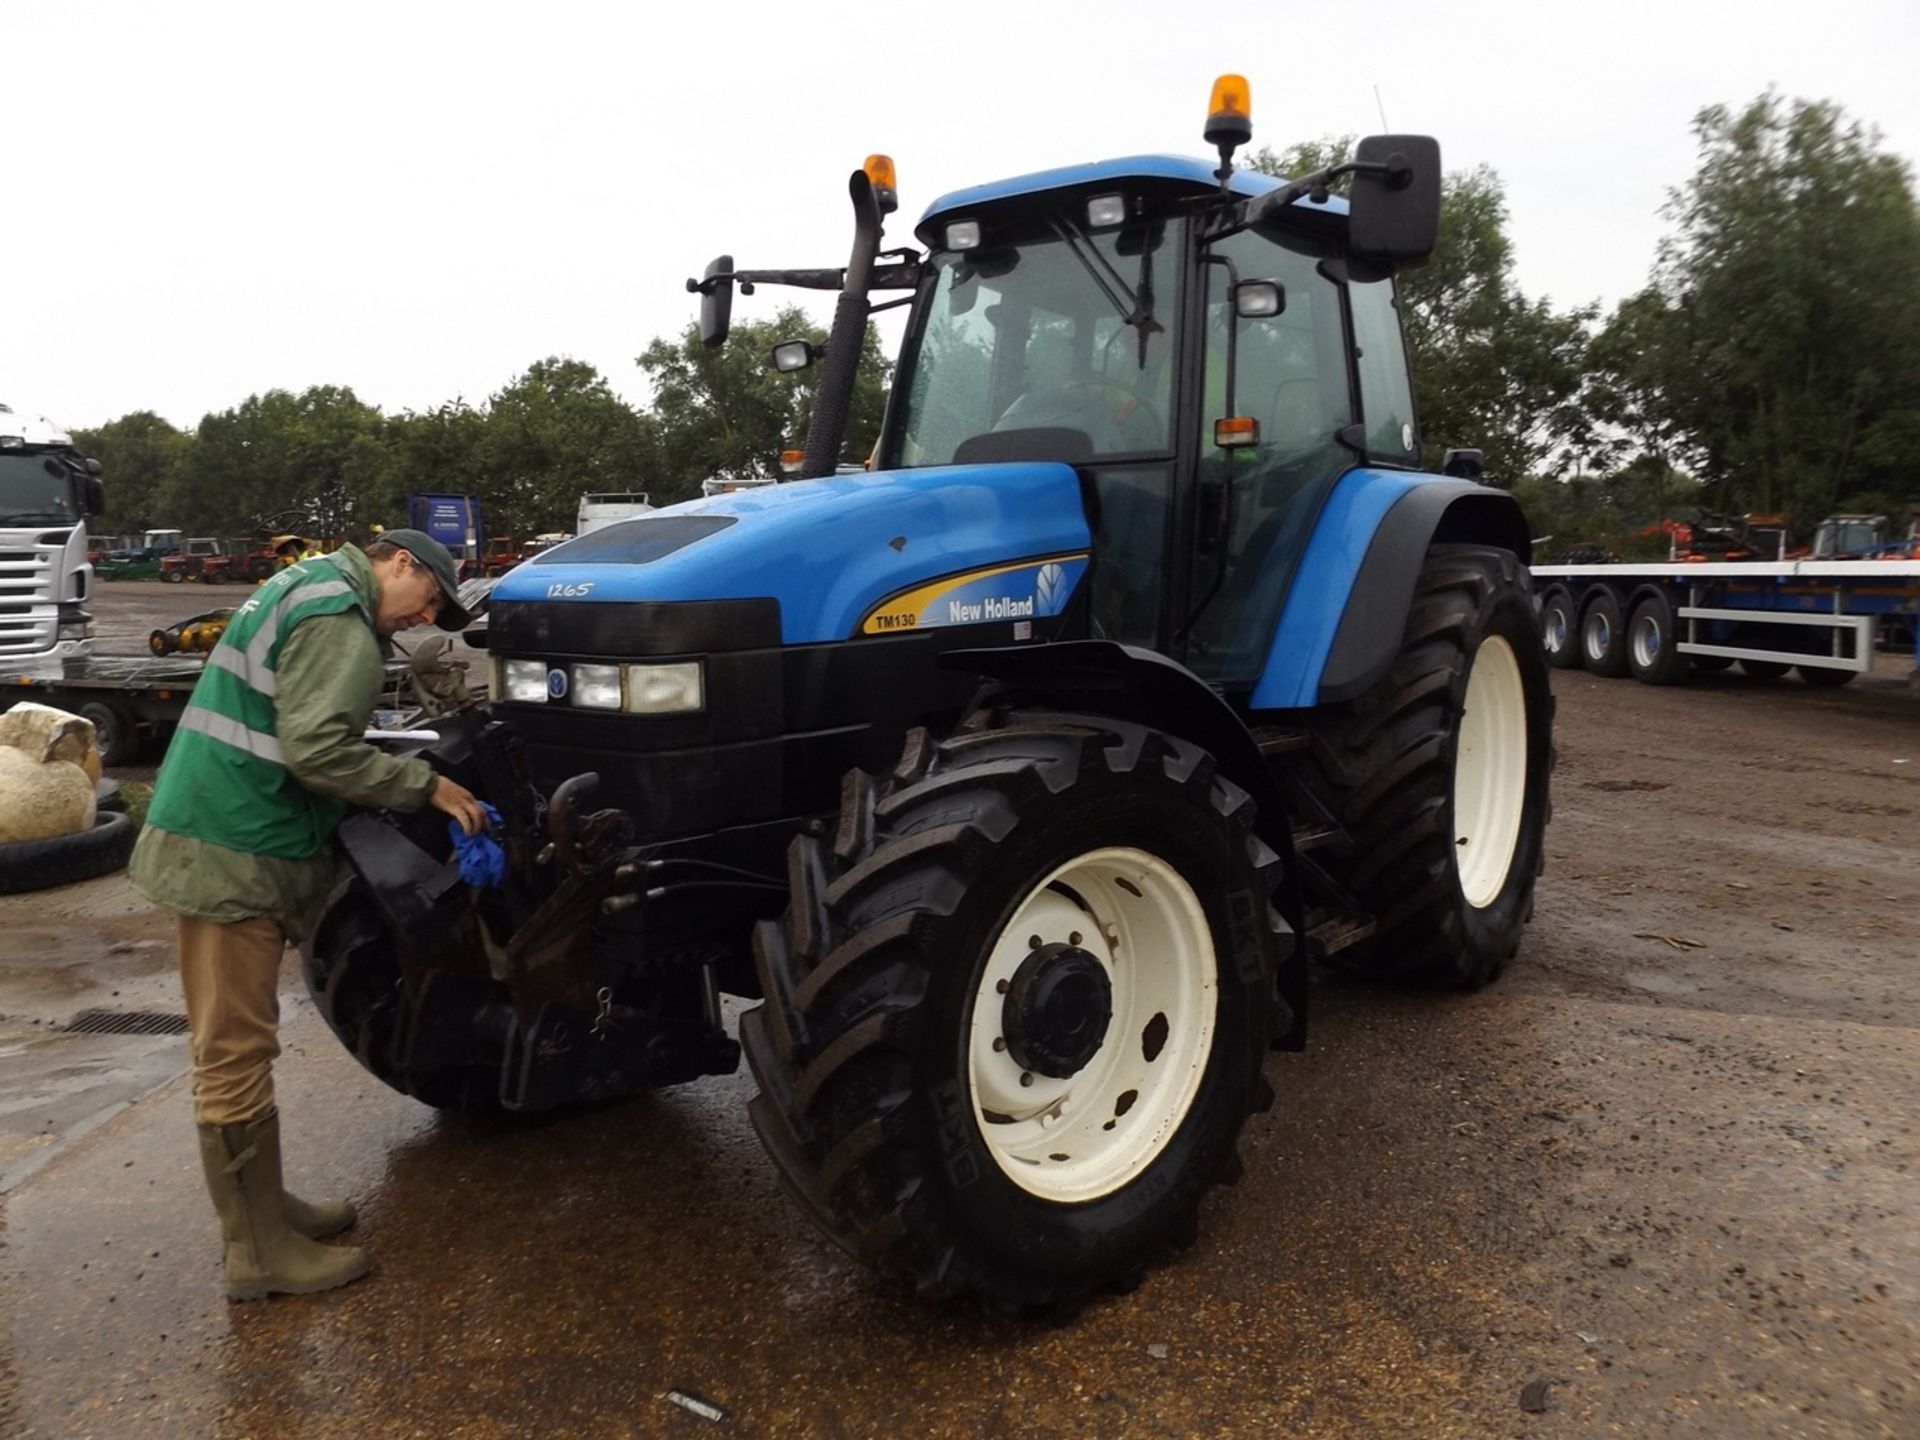 New Holland TM130 Range Command Tractor with Air Brakes. V5 will be supplied. Reg.No. MX57 GUE - Image 2 of 7